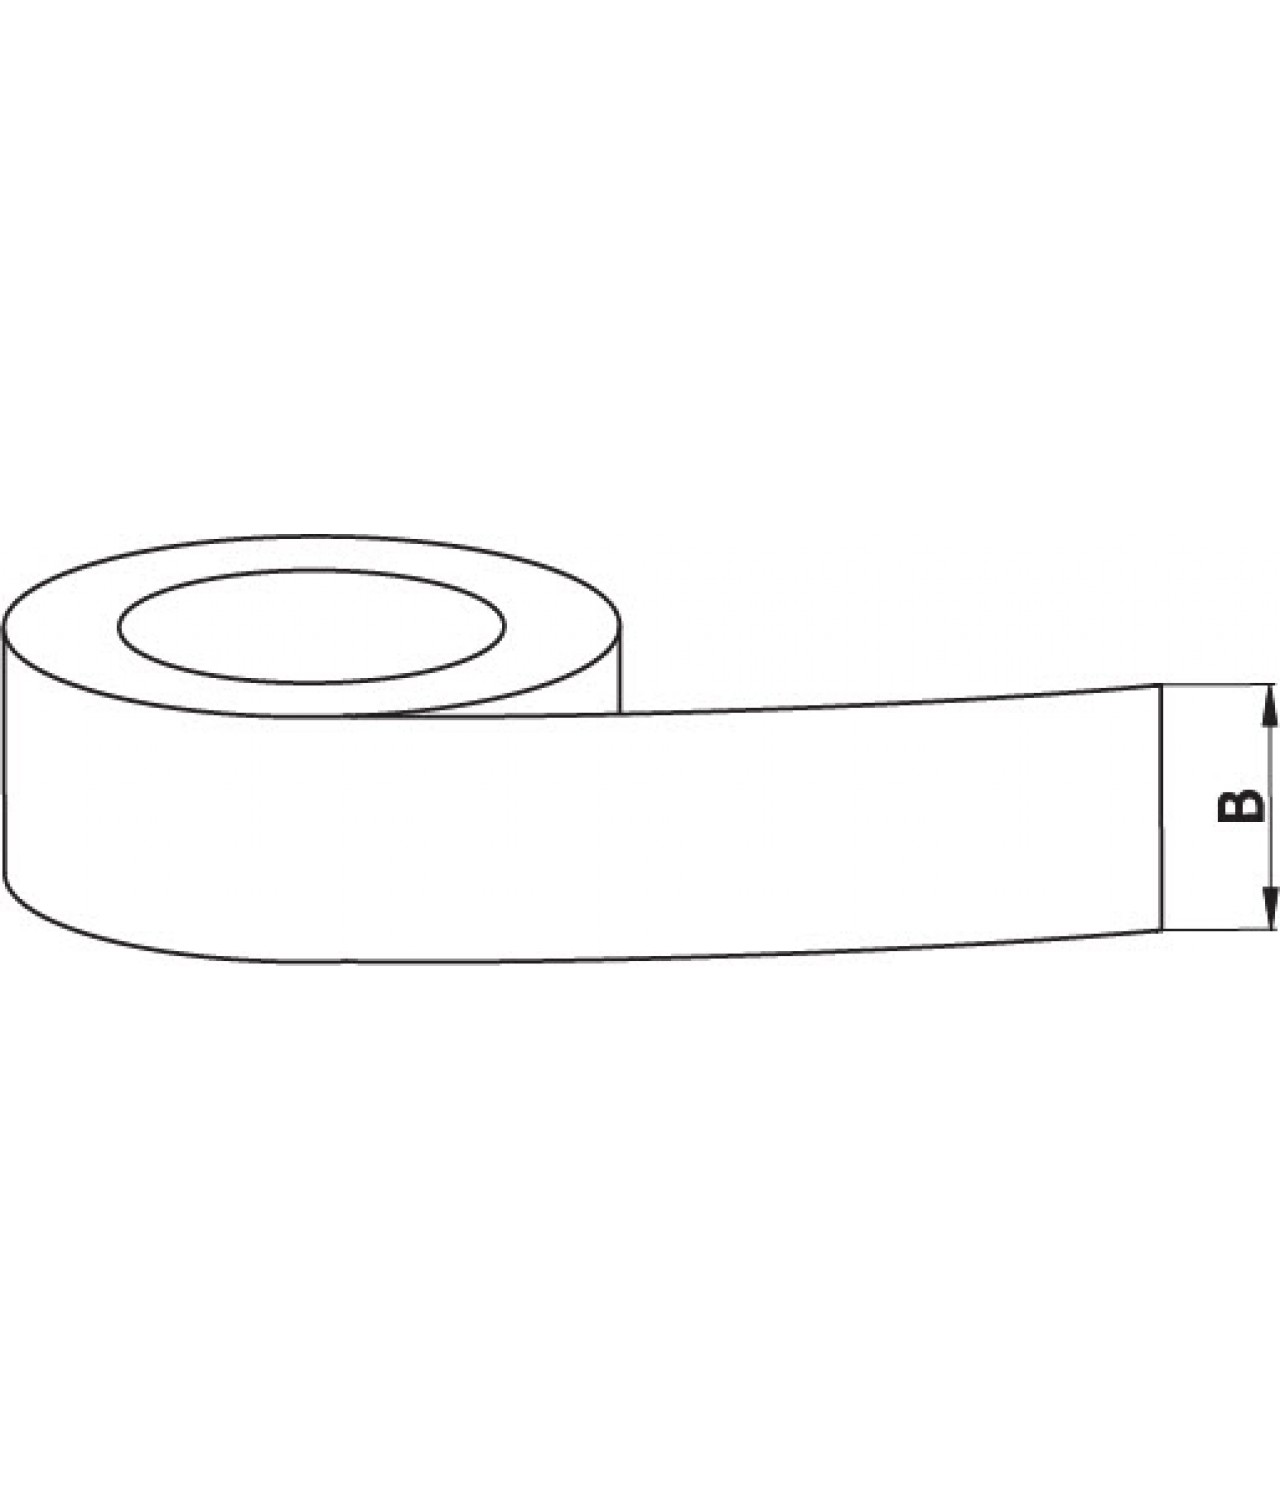 Adhesive insulation tape for joints ARM50/15/3, 15 m - drawing